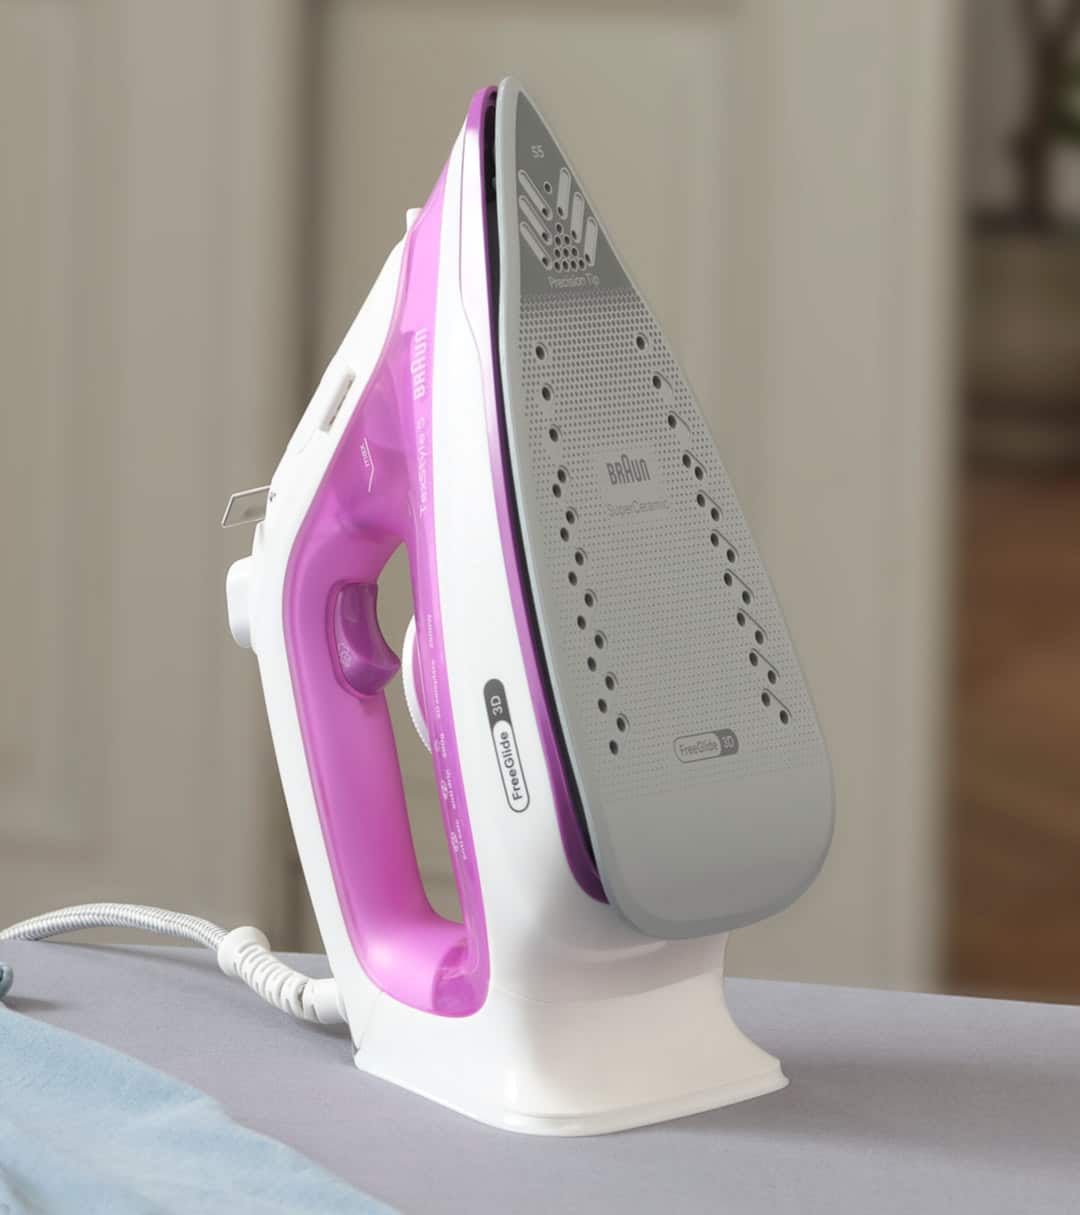 A pink Braun TexStyle 5 Steam iron in upright position